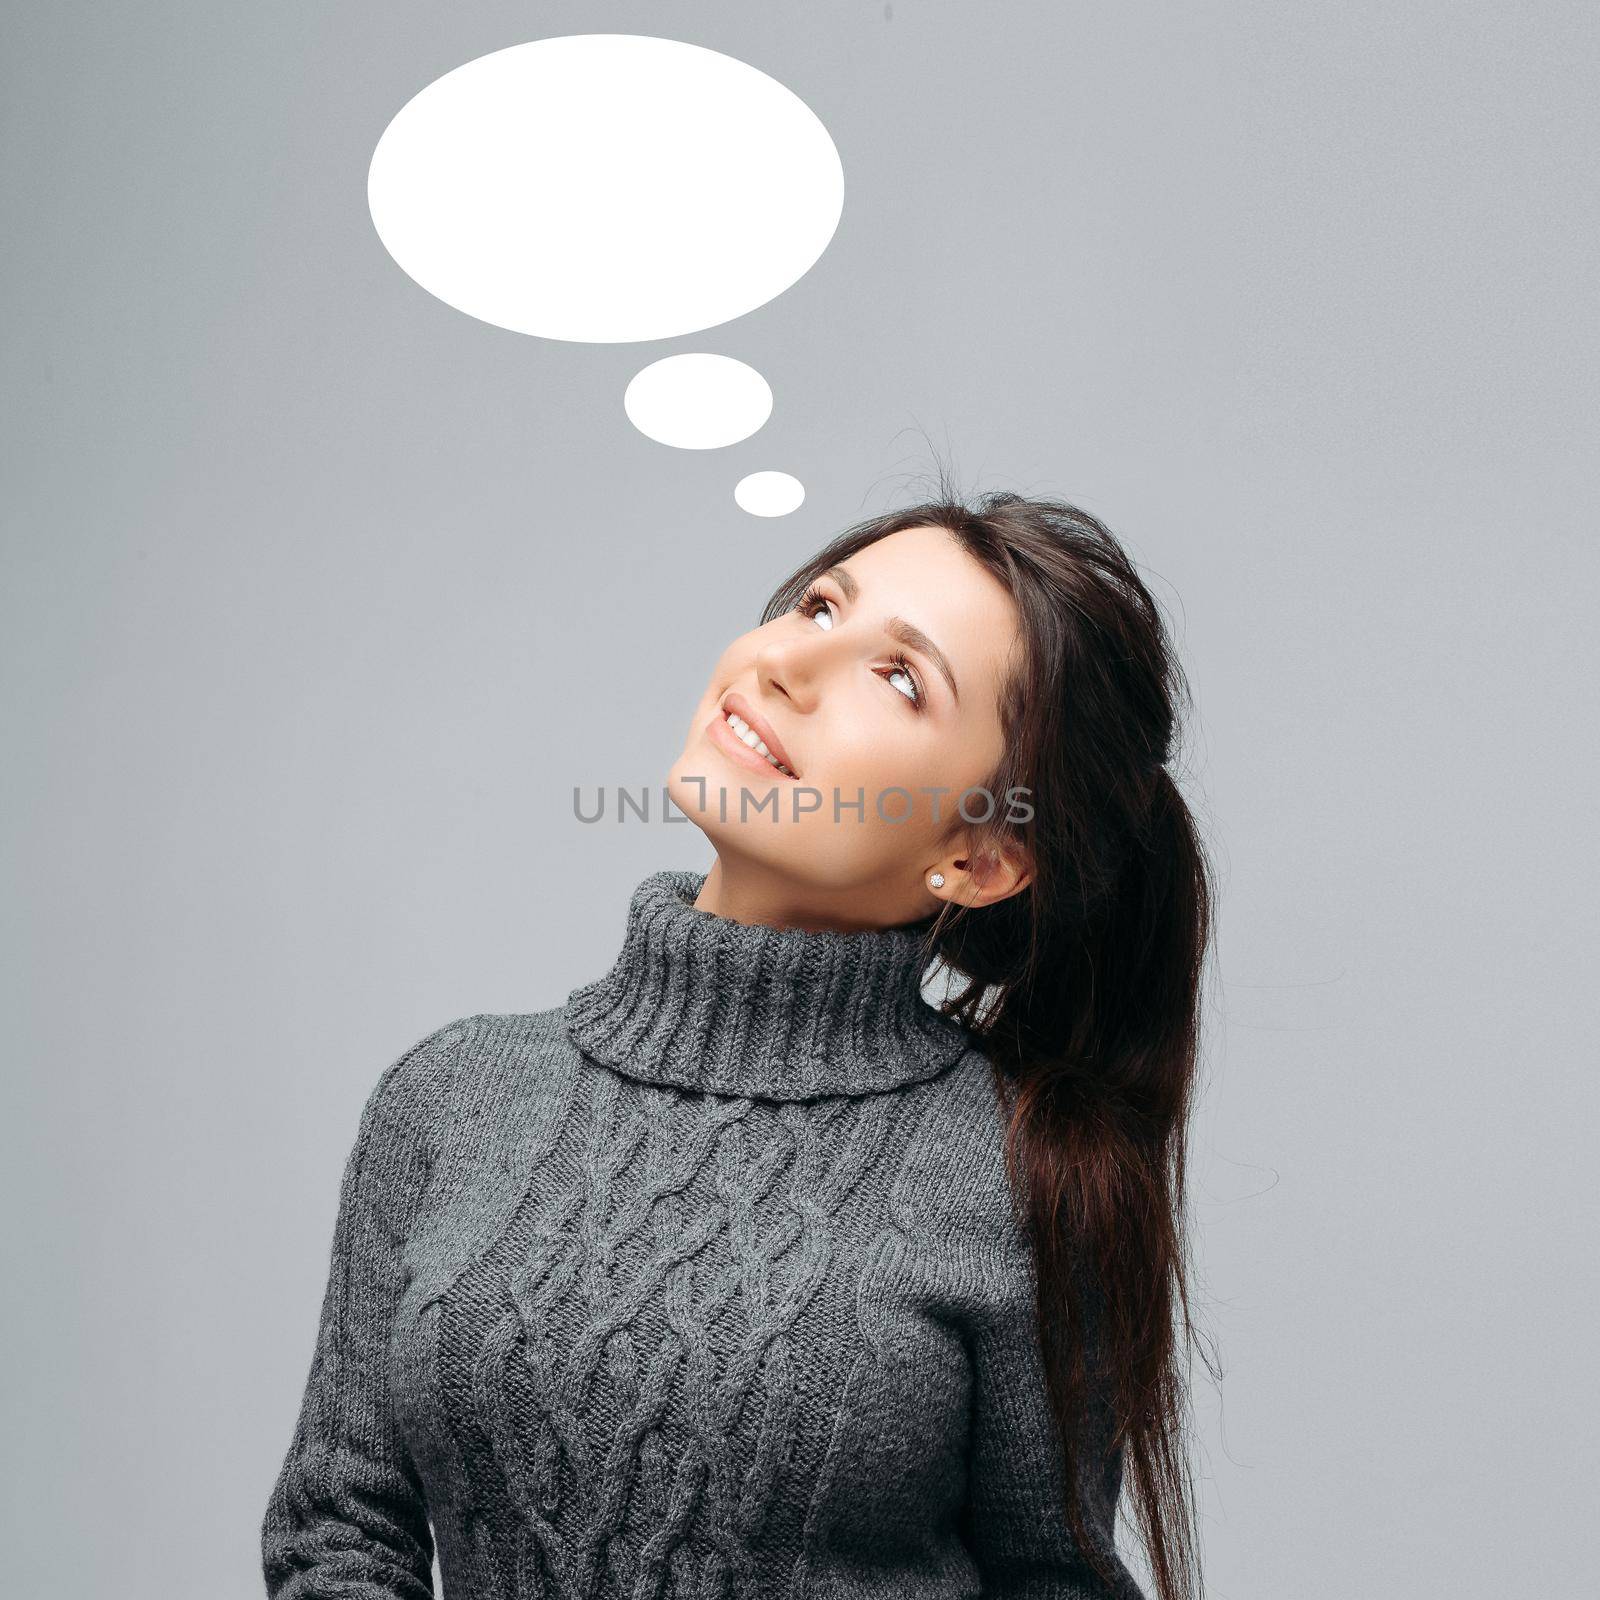 Waist up portrait of happy dreaming pretty woman with amazing long hair and nice smile. Beautiful female posing at studio in fashionable sweater. Isolated on gray background